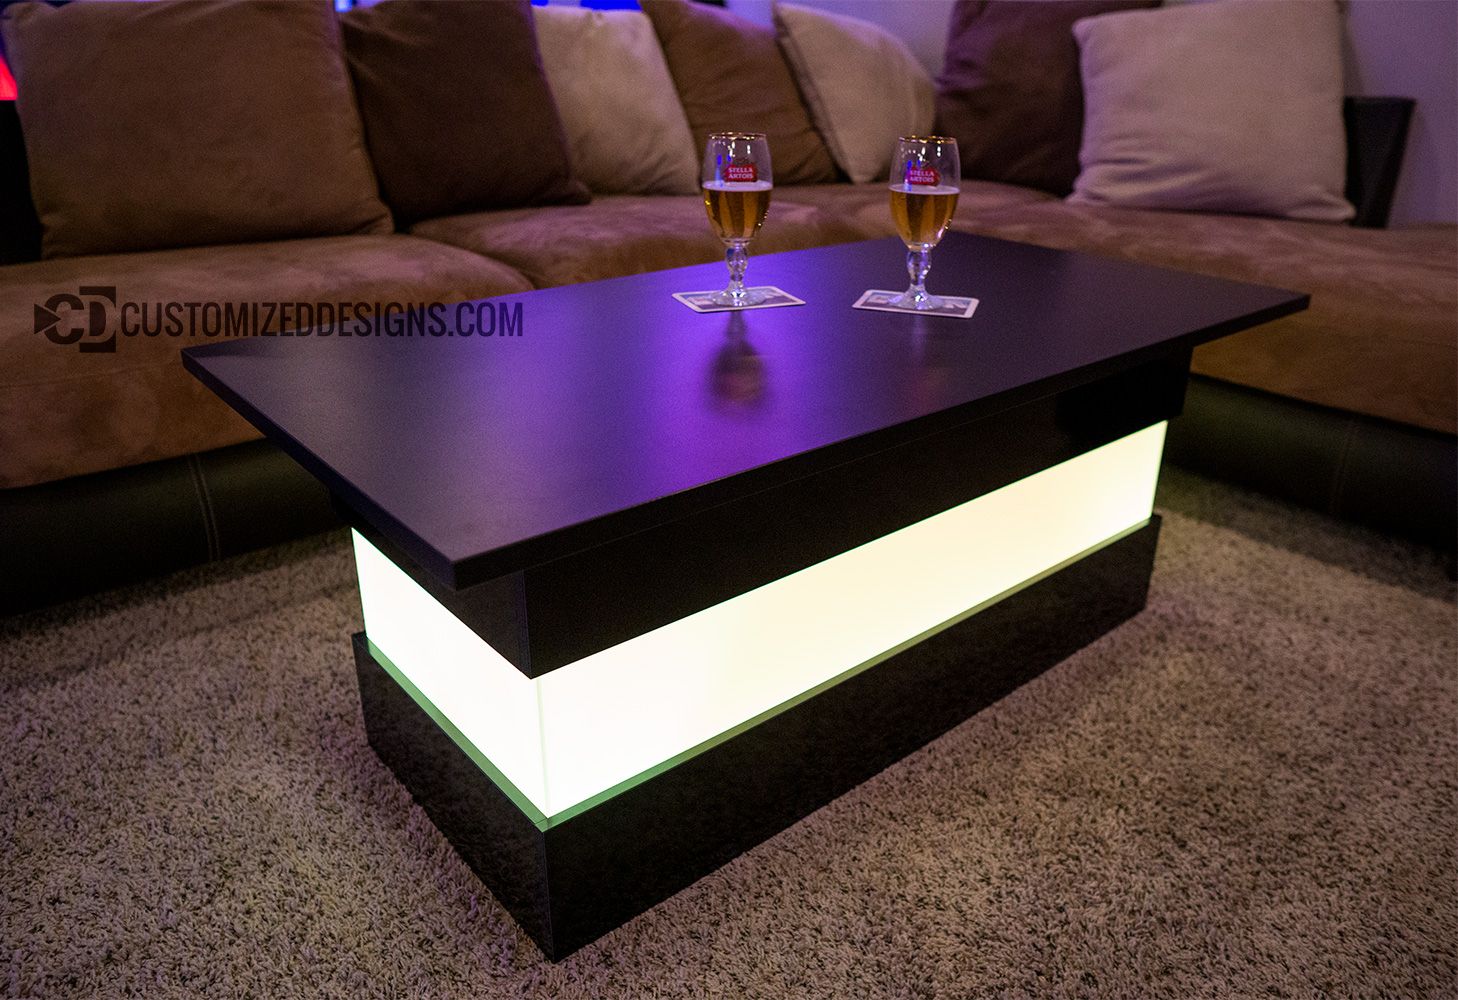 Mirage Led Lighted Coffee Table – Perfect For Lounges And Nightclubs! With Regard To Led Coffee Tables With 4 Drawers (Gallery 18 of 20)